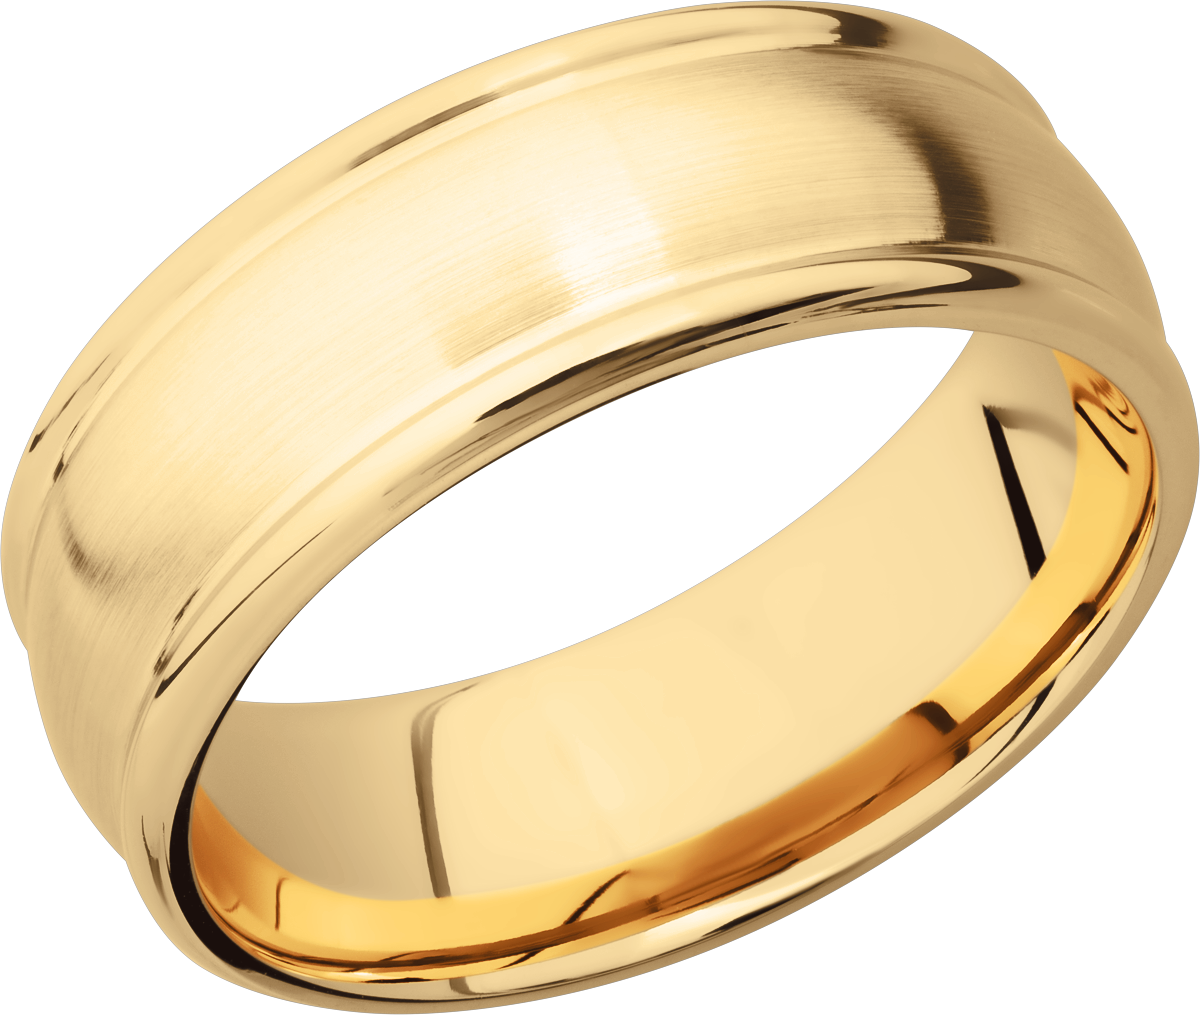 https://www.arthursjewelers.com/content/images/thumbs/Original/RED8-SATIN_YELLOW-172977278.png